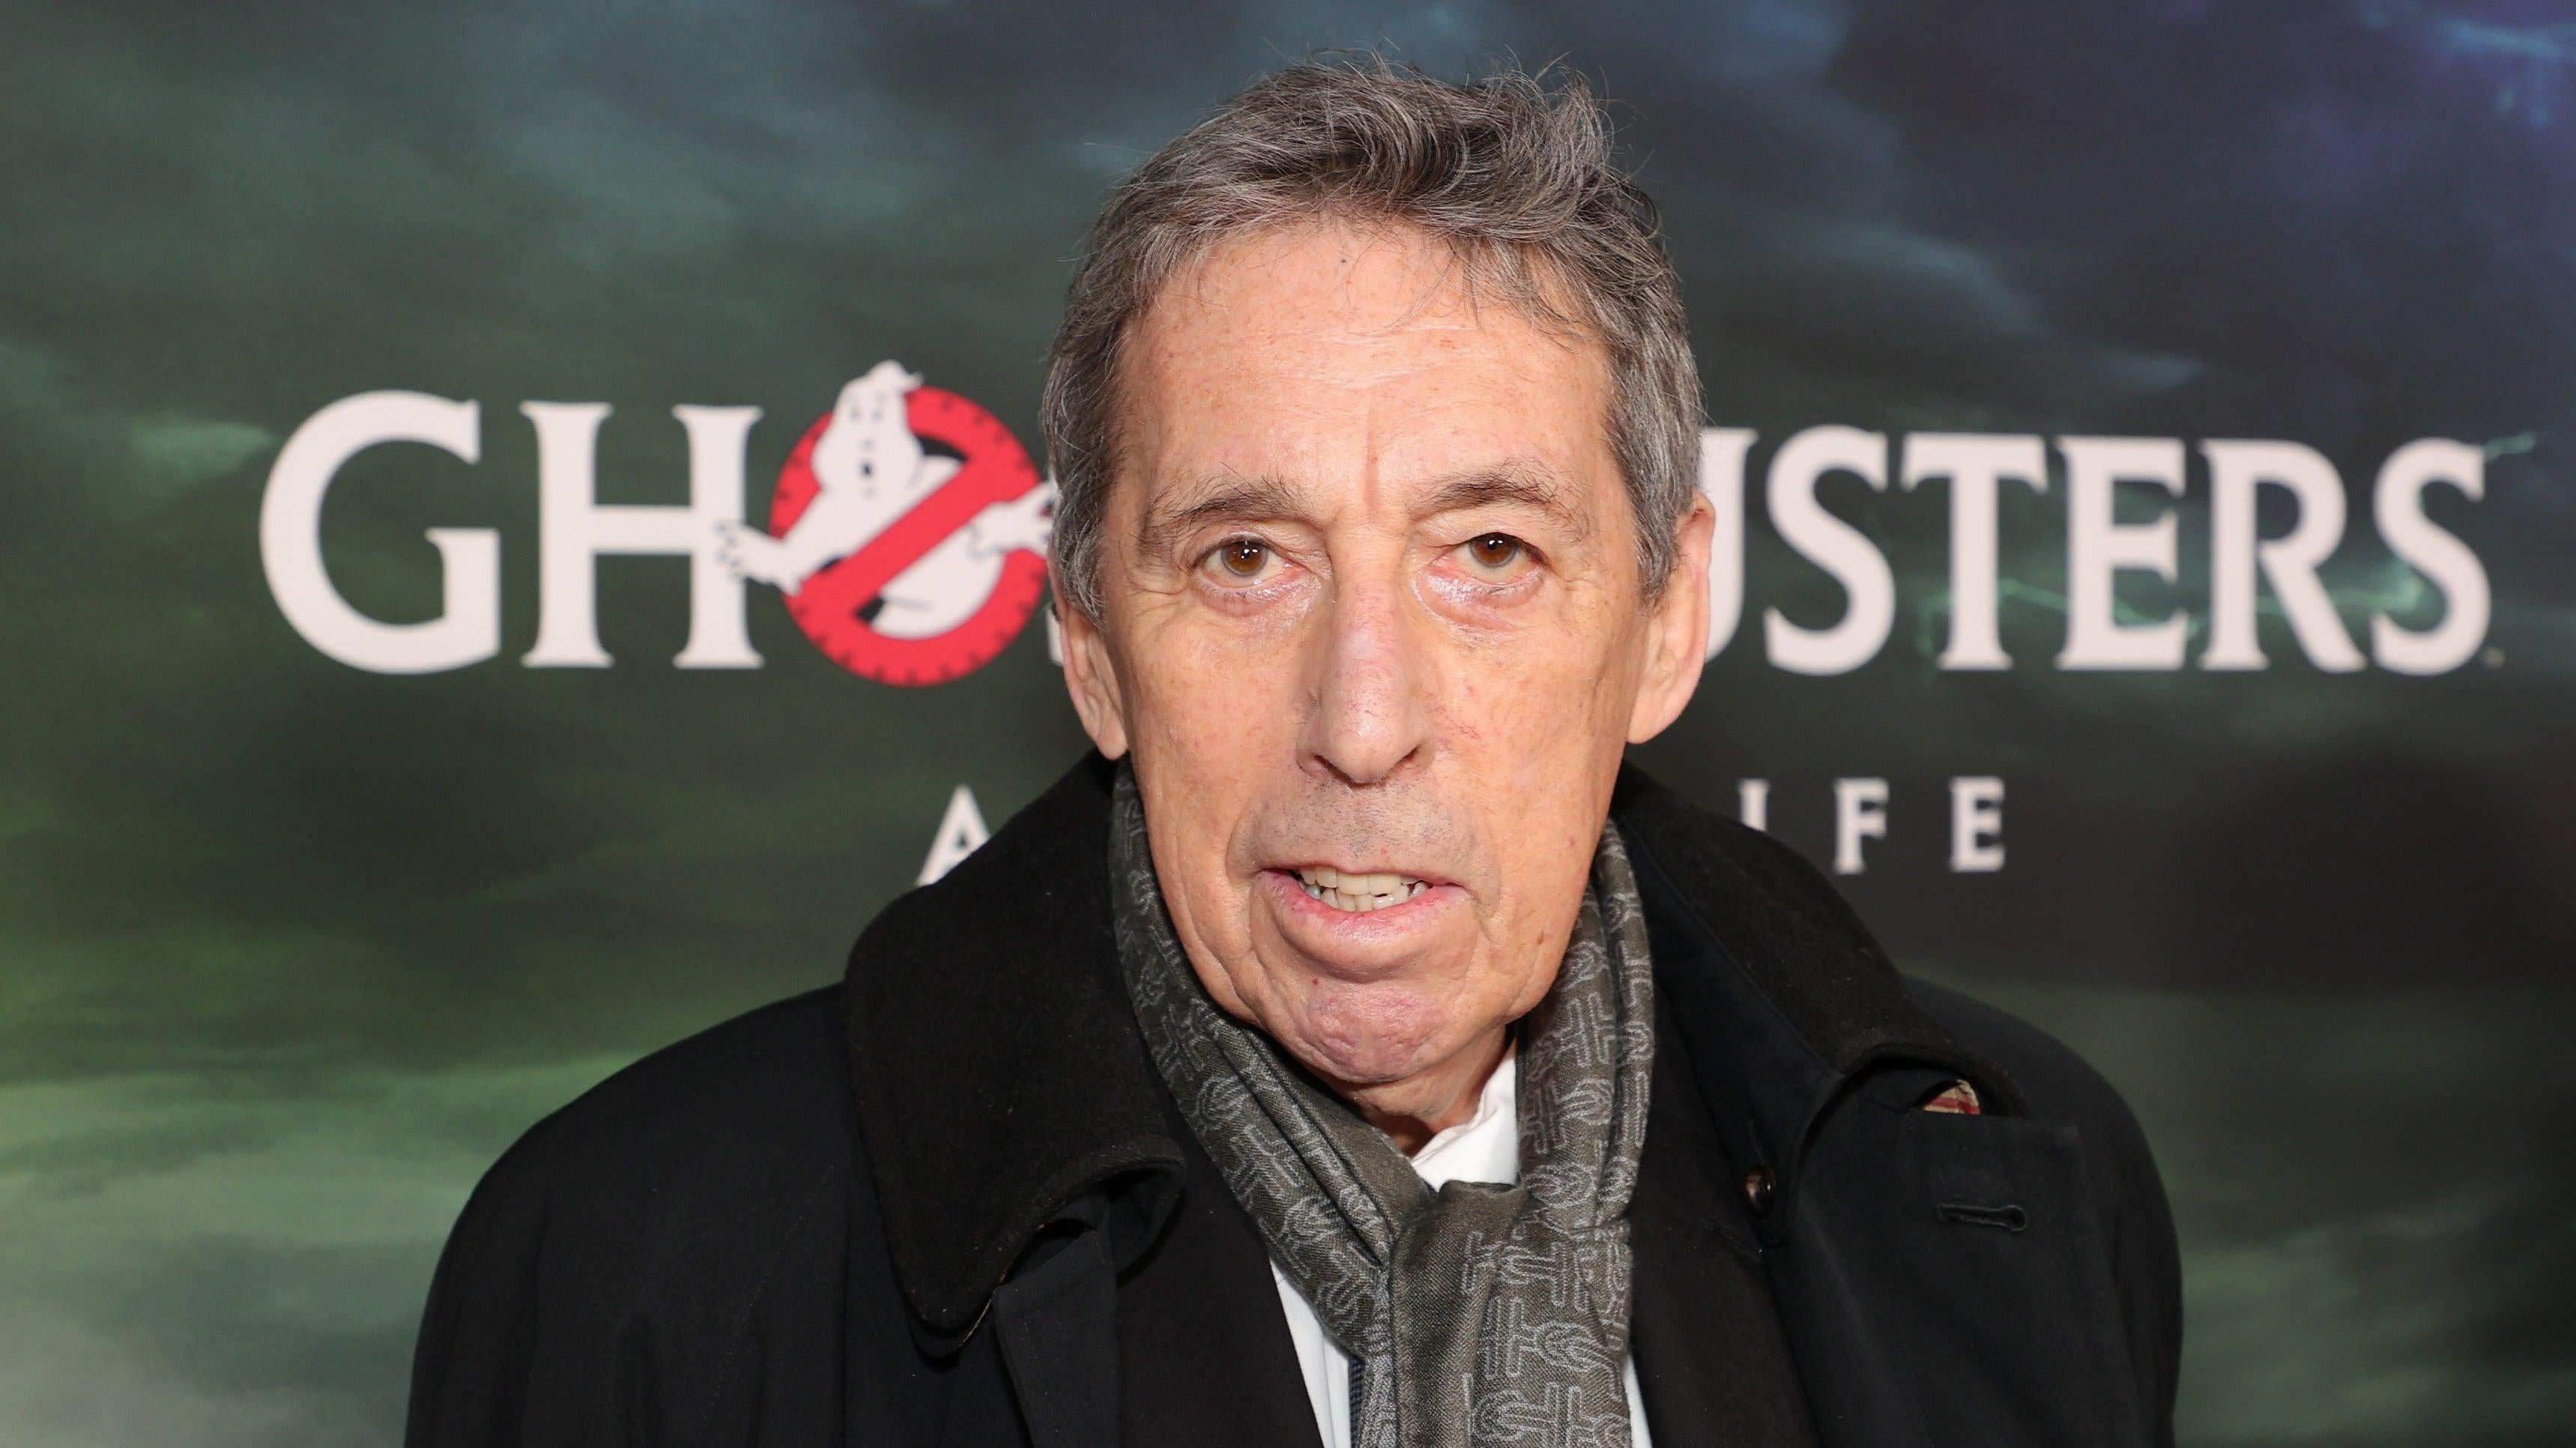  Ivan Reitman attends the Ghostbusters: Afterlife world premiere on November 15, 2021 in New York City. (Photo: Theo Wargo/Getty Images for Sony Pictures, Getty Images)